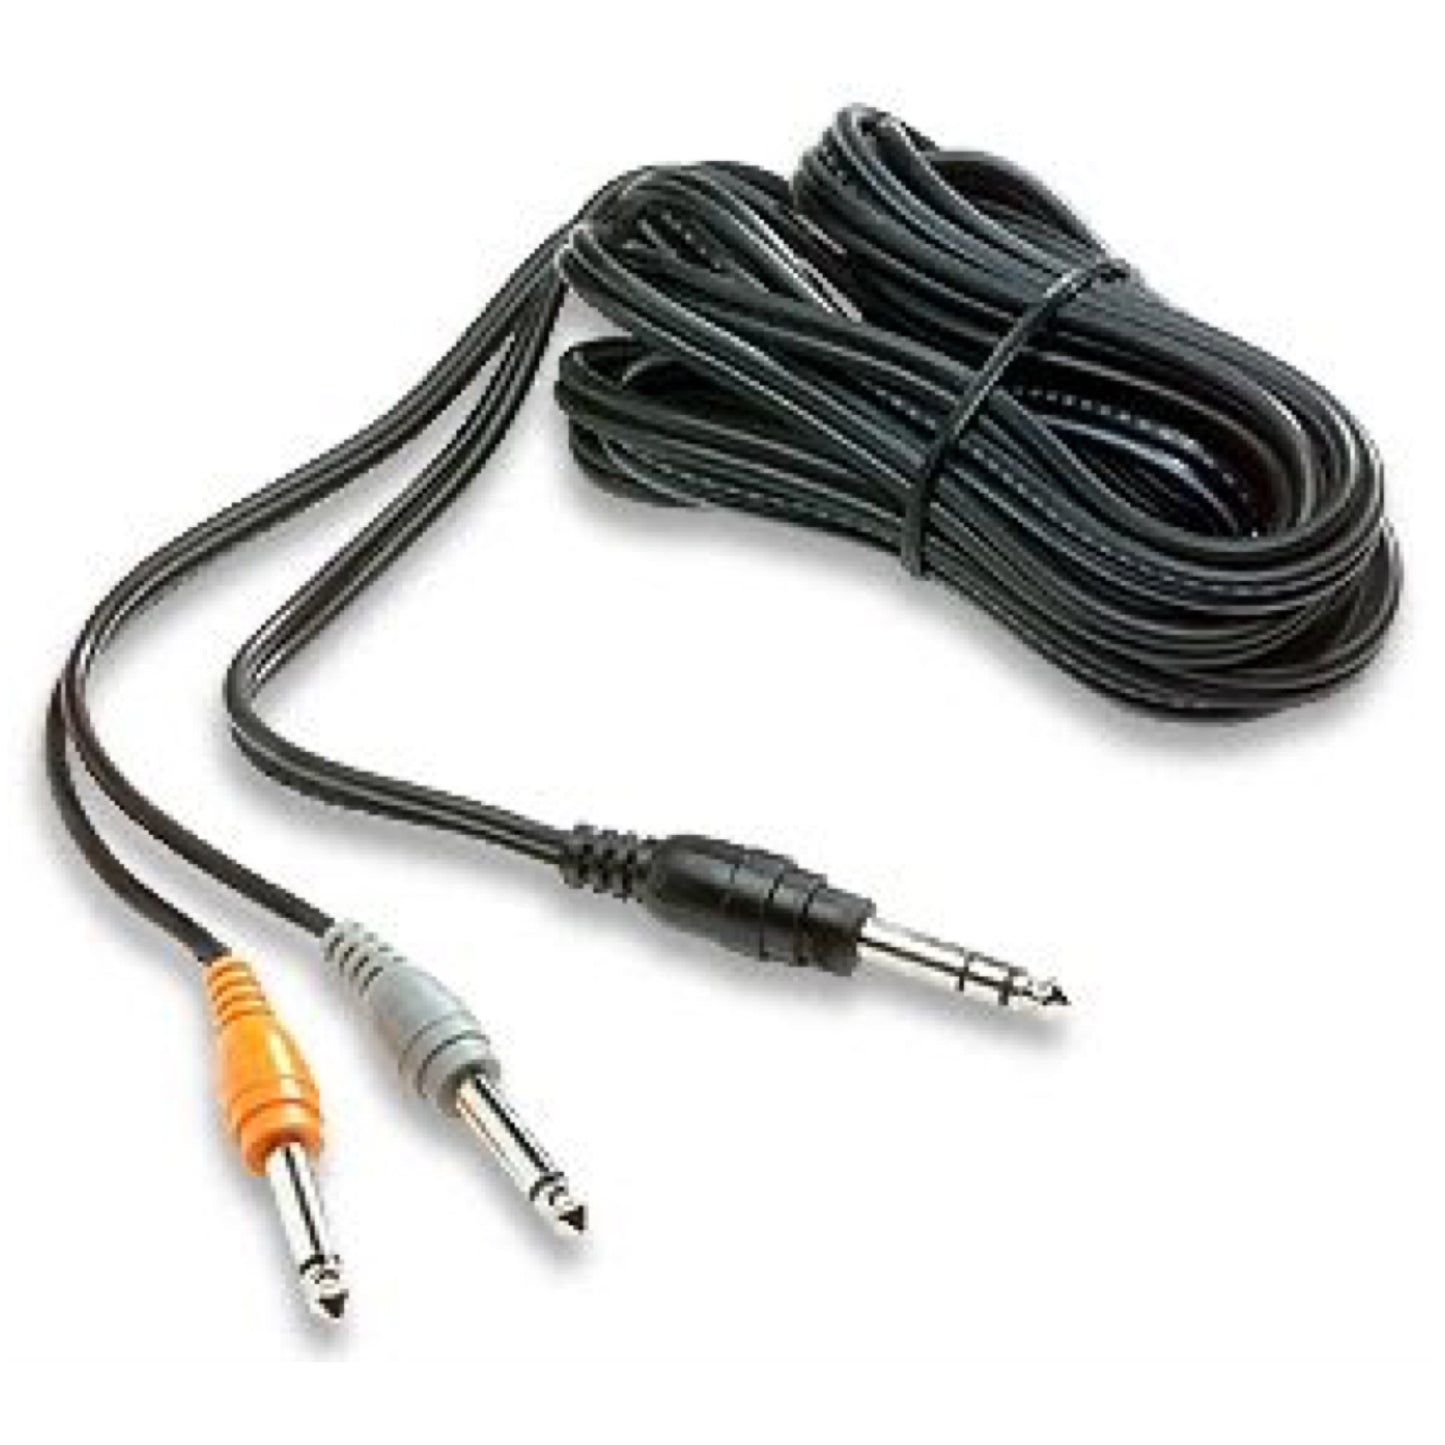 Fishman Stereo Y Cable, 13 Foot